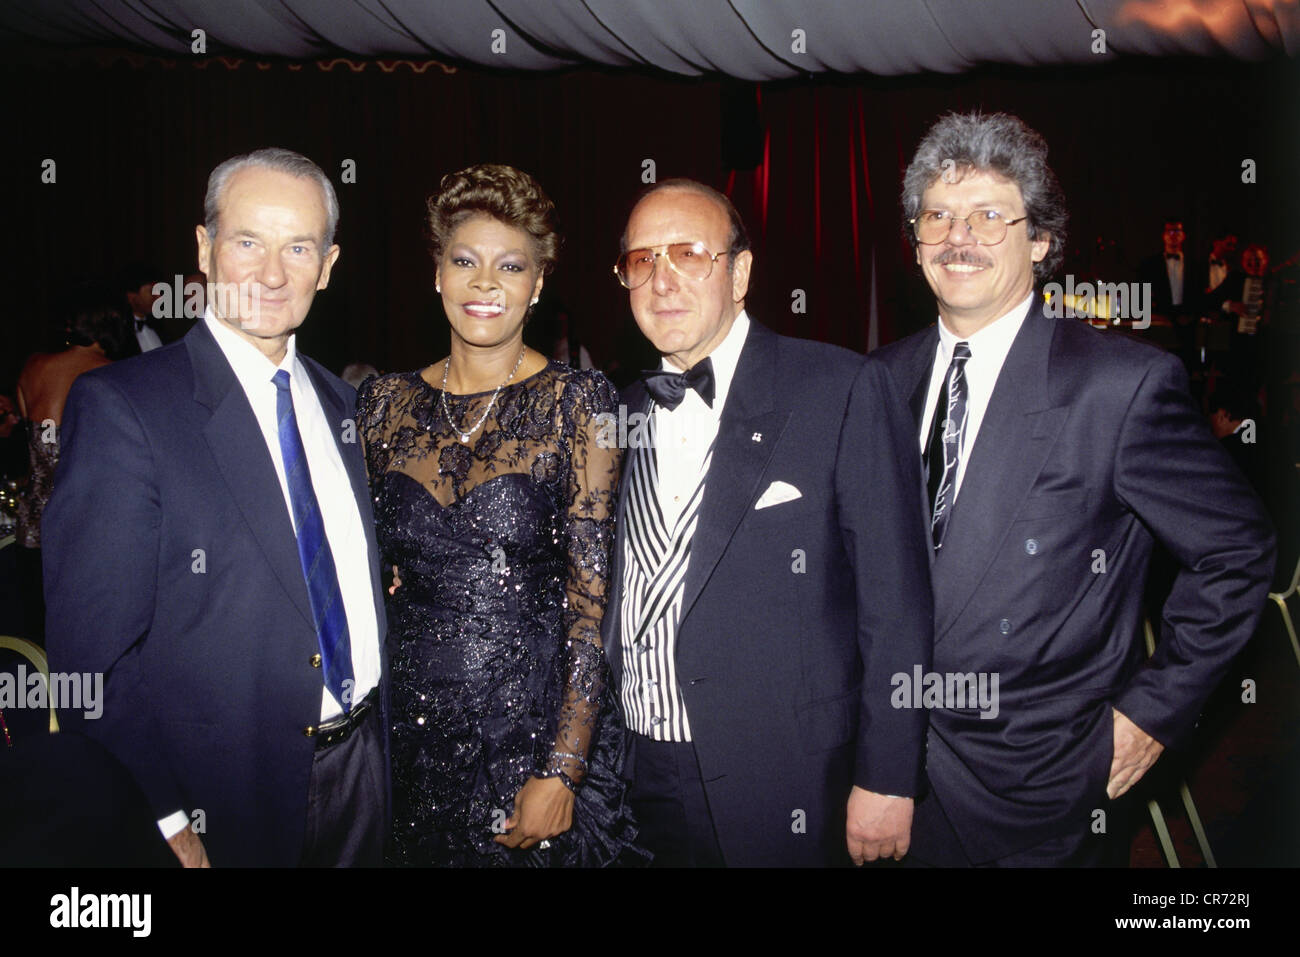 Warwick, Dionne, * 12.12.1941, US singer, group picture, with Reinhard Mohn, Clive Davis and Thomas Stein, Bertelsmann Party on occasion of Egmont 'Monti' Lueftner's 60th birthday, Munich, 18.11.1991, Stock Photo